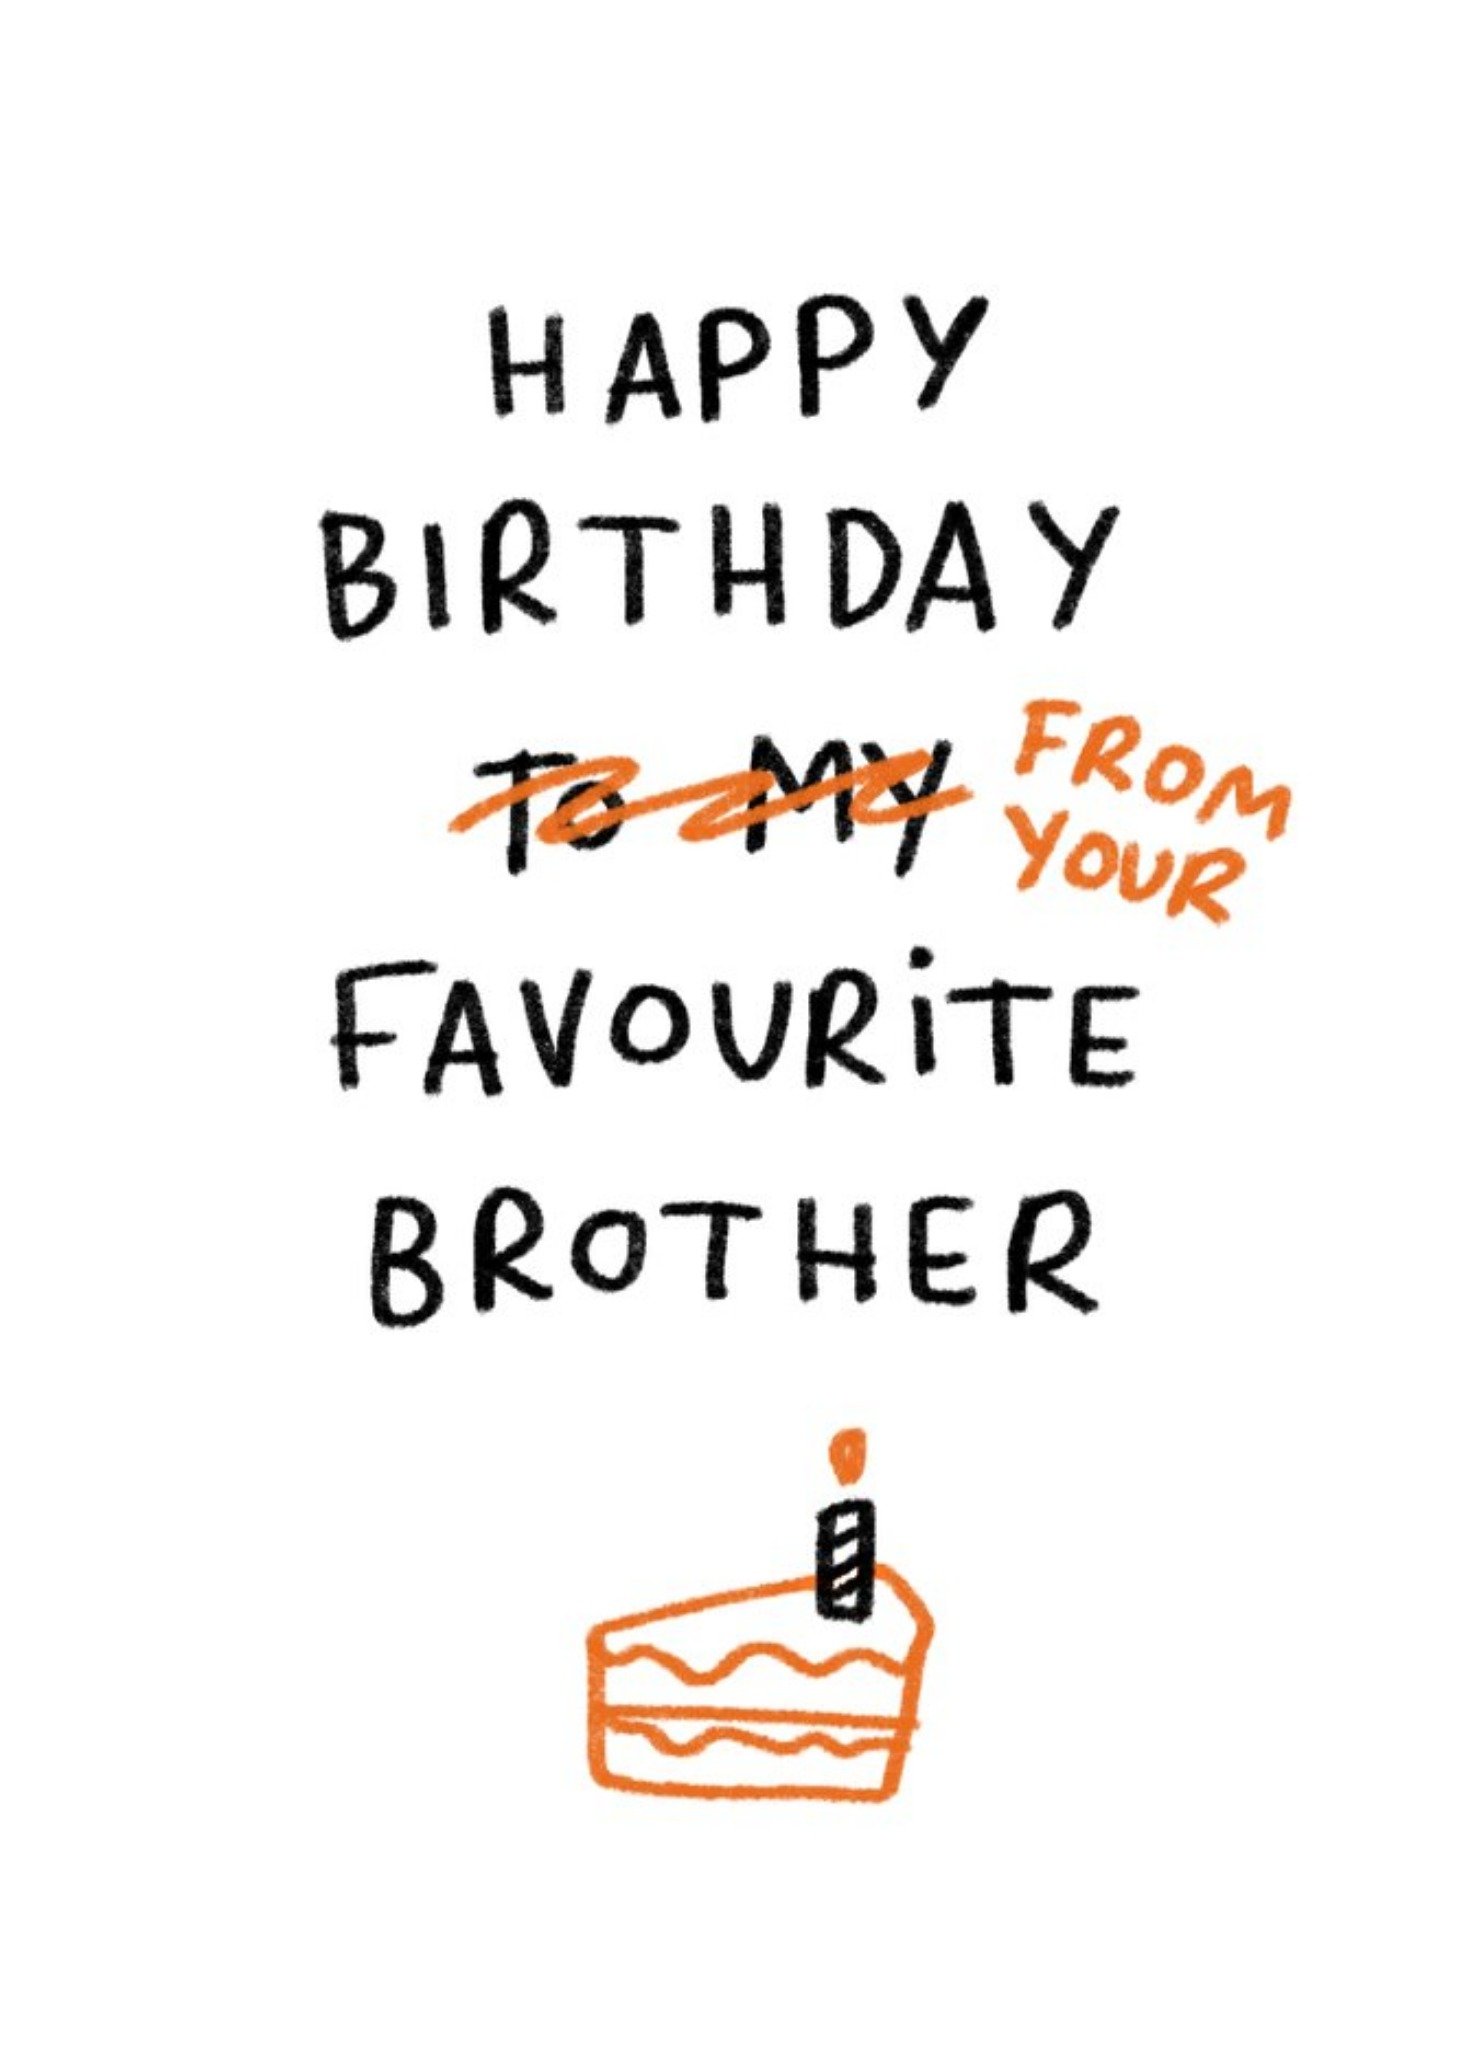 Moonpig Happy Birthday From Your Favourite Brother Funny Card Ecard